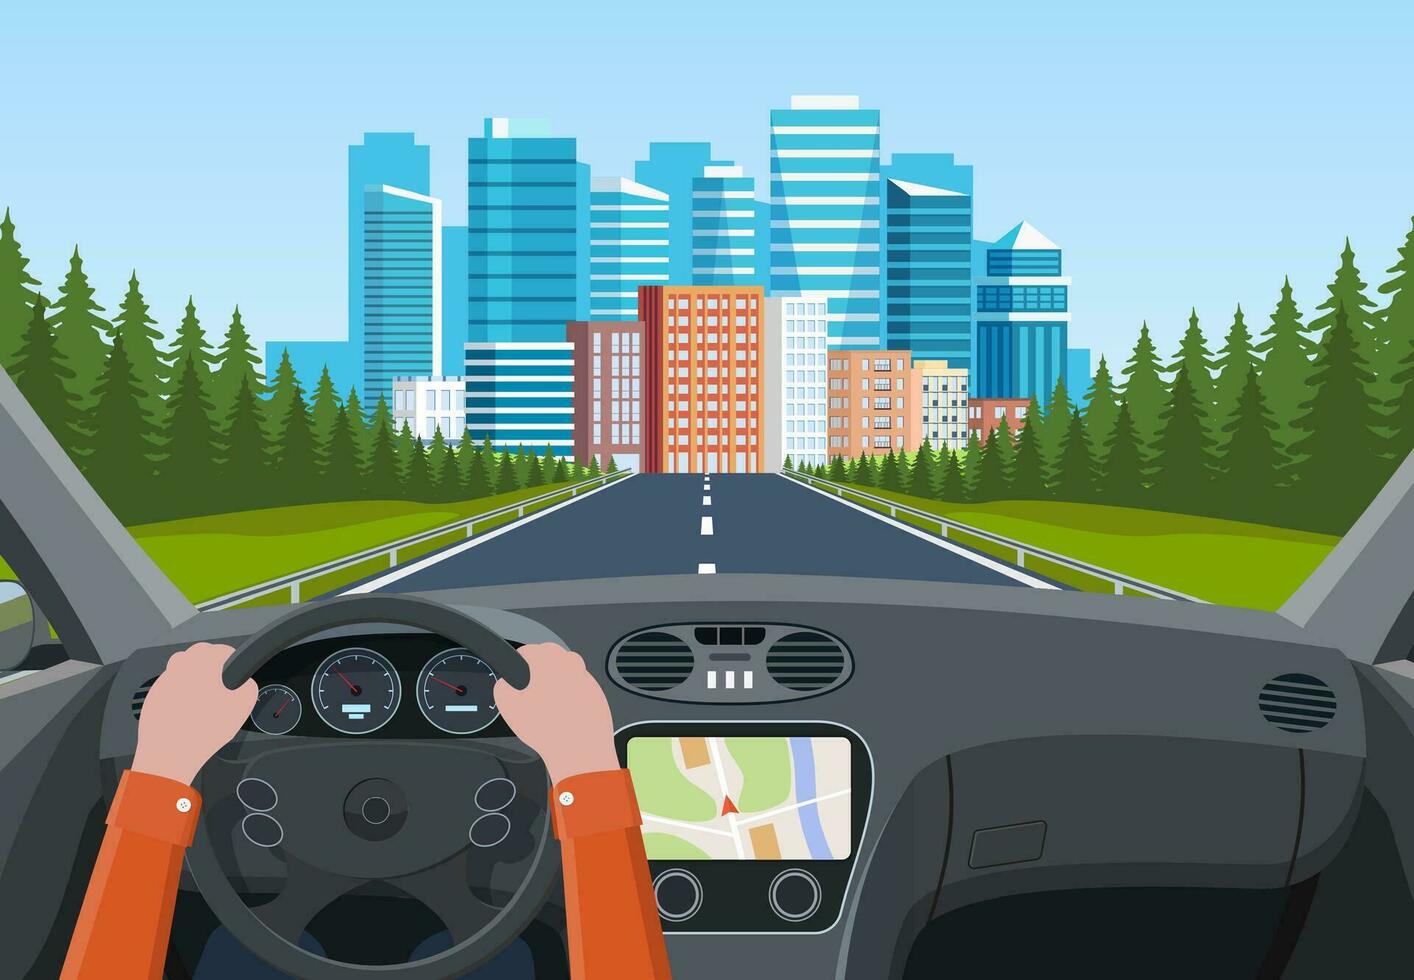 View of the road from the car interior. Road way to city buildings on horizon. Hands on Steering Wheel, inside car driver. modern big skyscrapers town far away ahead. Vector illustration in flat style